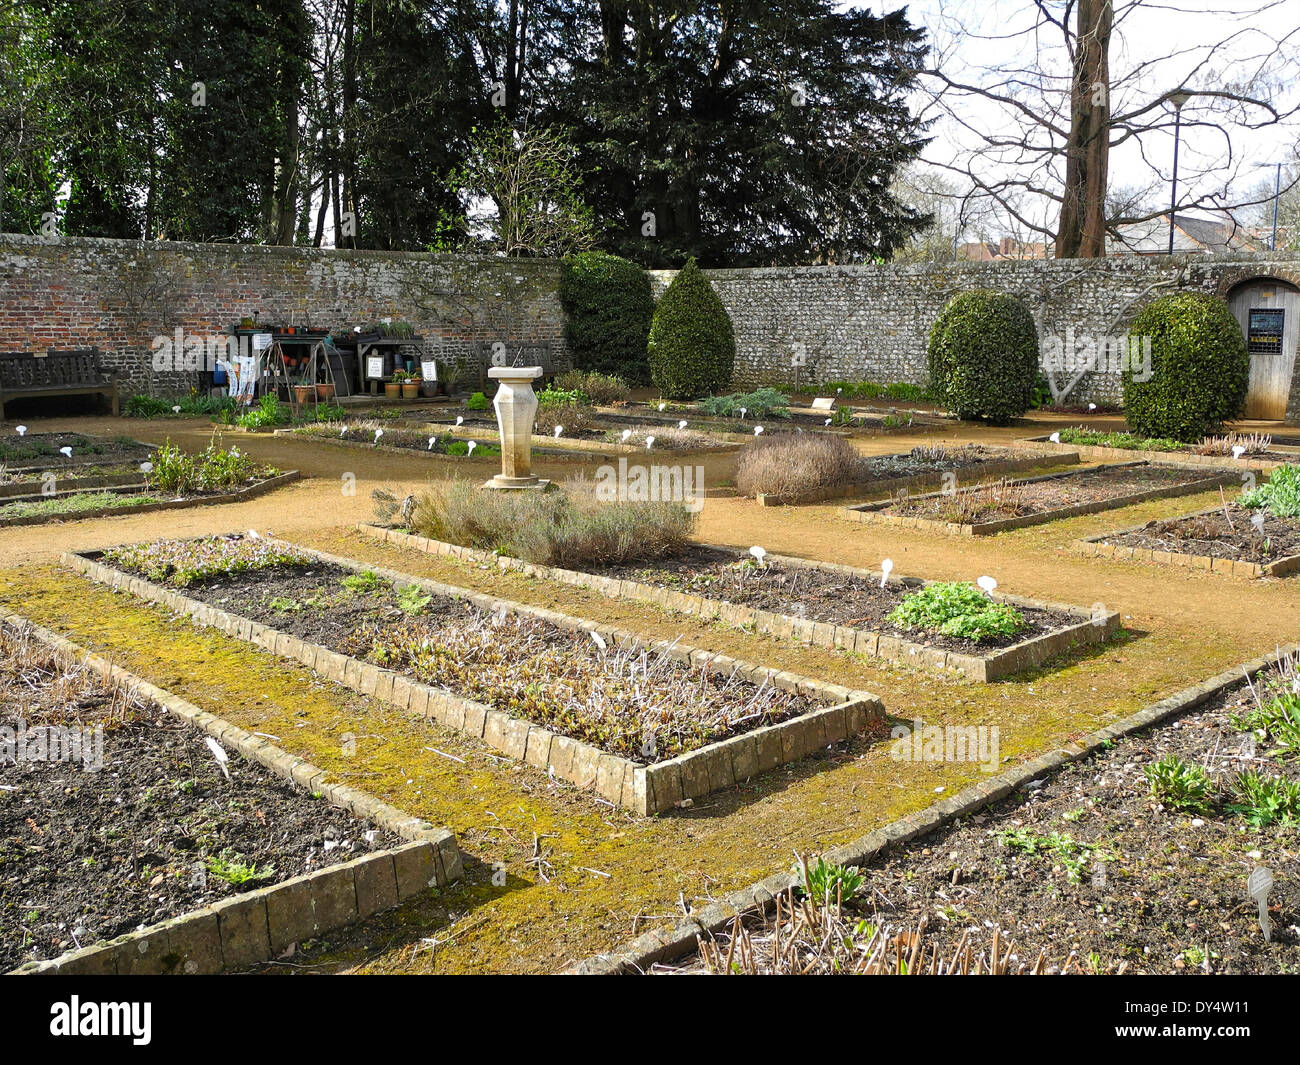 Petersfield Physic Gardens Garden in Petersfield, Hampshire contains a large collection of culinary and medicinal herb and plants. Stock Photo